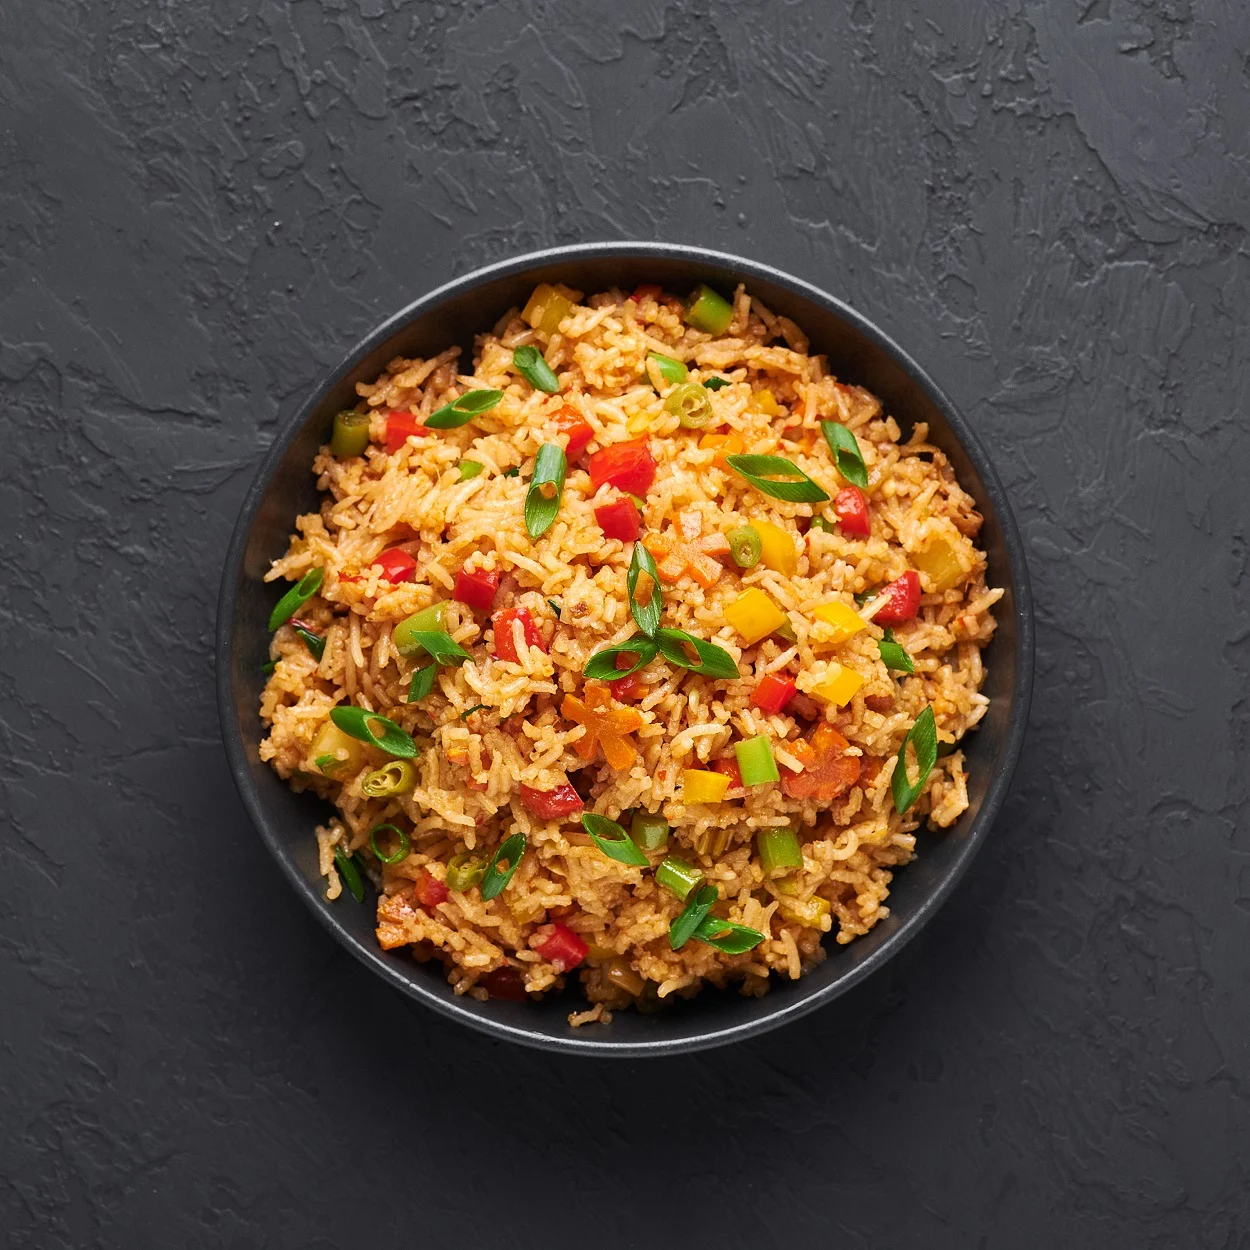 4 Indian Fried Rice Recipes – Chicken, Vegetable & More!